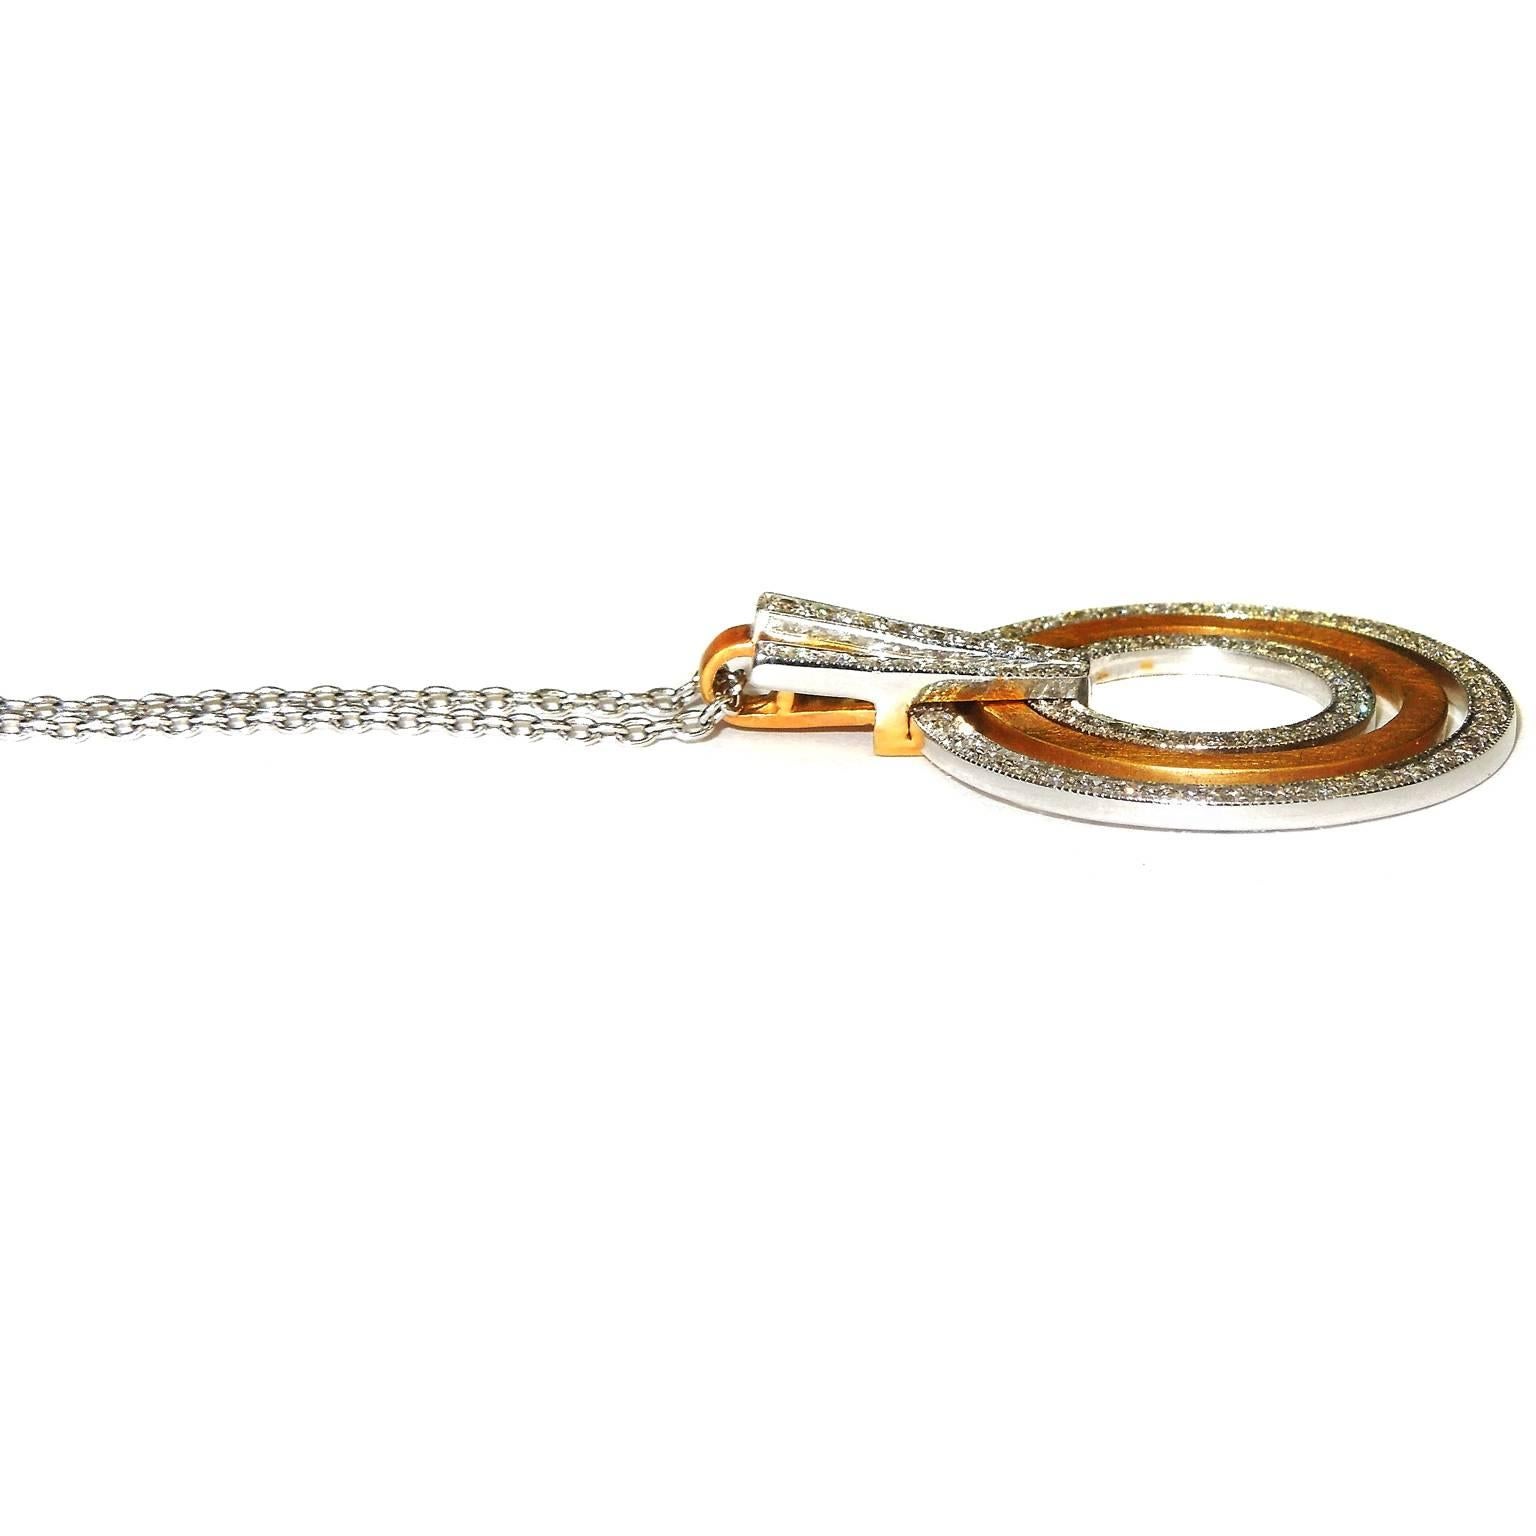 18K Yellow and White Gold Pendant with 14K White Gold chain

1.25ct. G Color, VS Clarity Diamonds

Pendant: 1.4 inches L x 1.1 inch W

Chain is done in 14K white gold, 20 inches

13.68 grams total gold

Made in Turkey

Estate